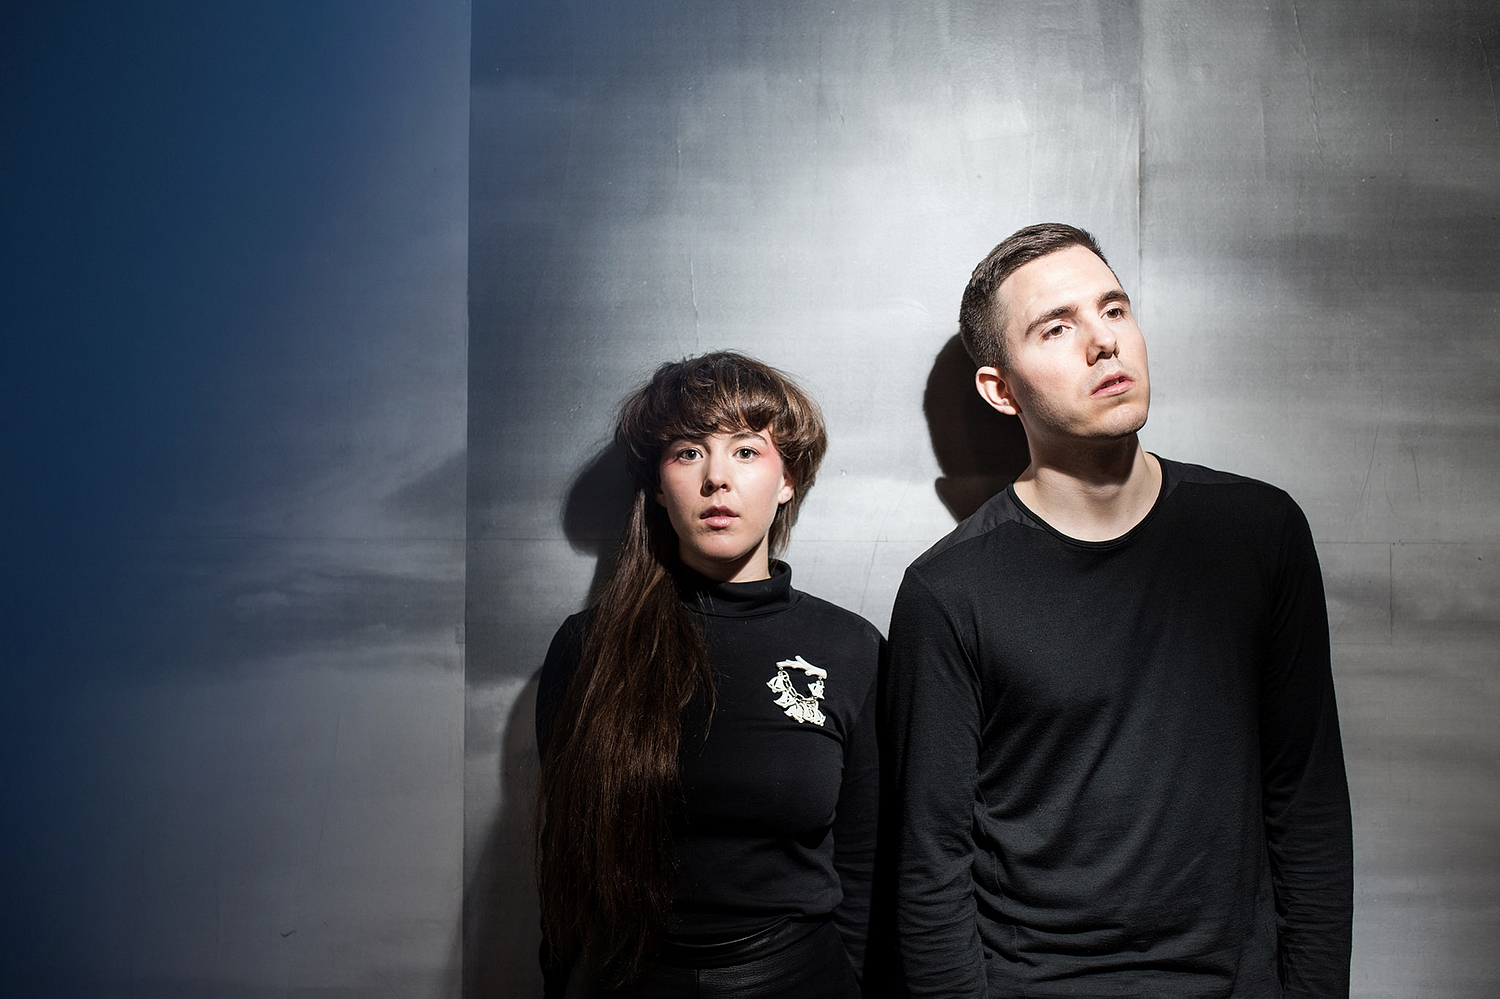 Purity Ring: "We’ve both changed so much"